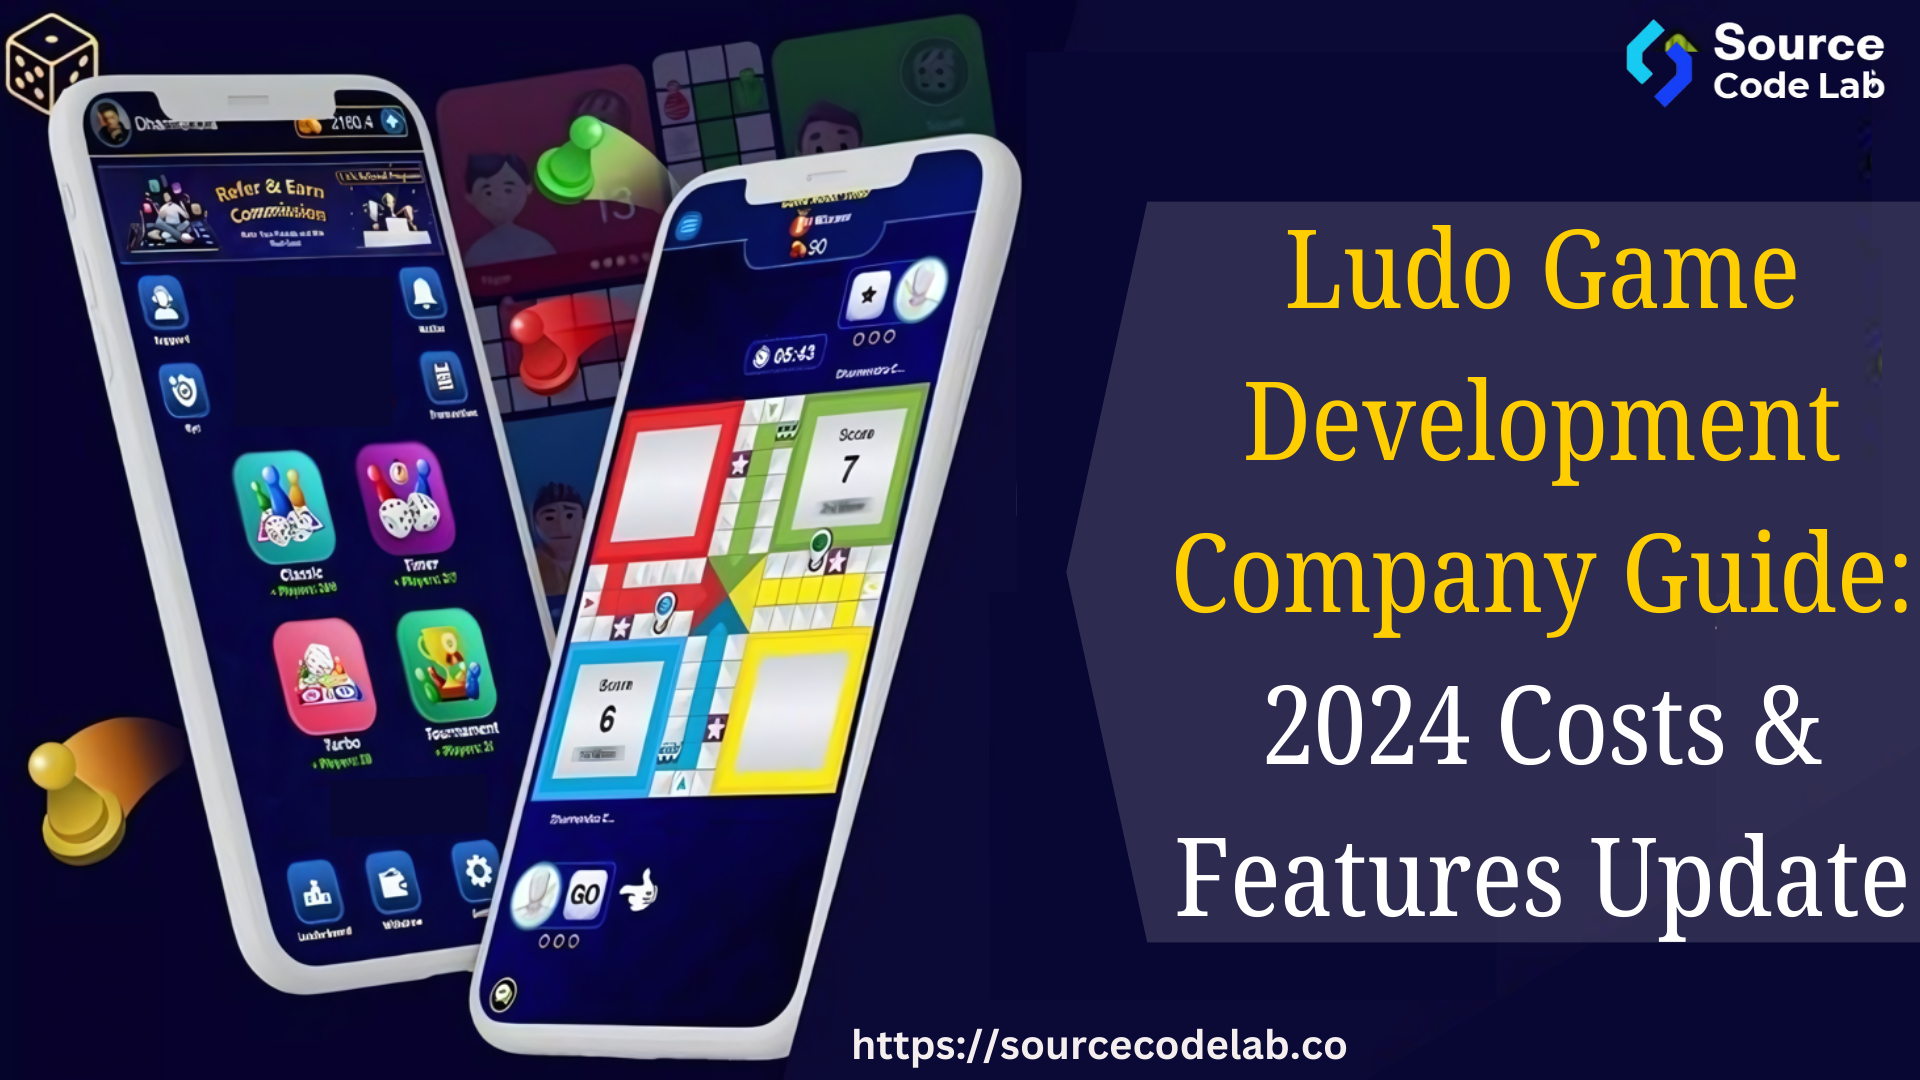 Ludo Game Development Company Guide: Costs & Features Update 2024